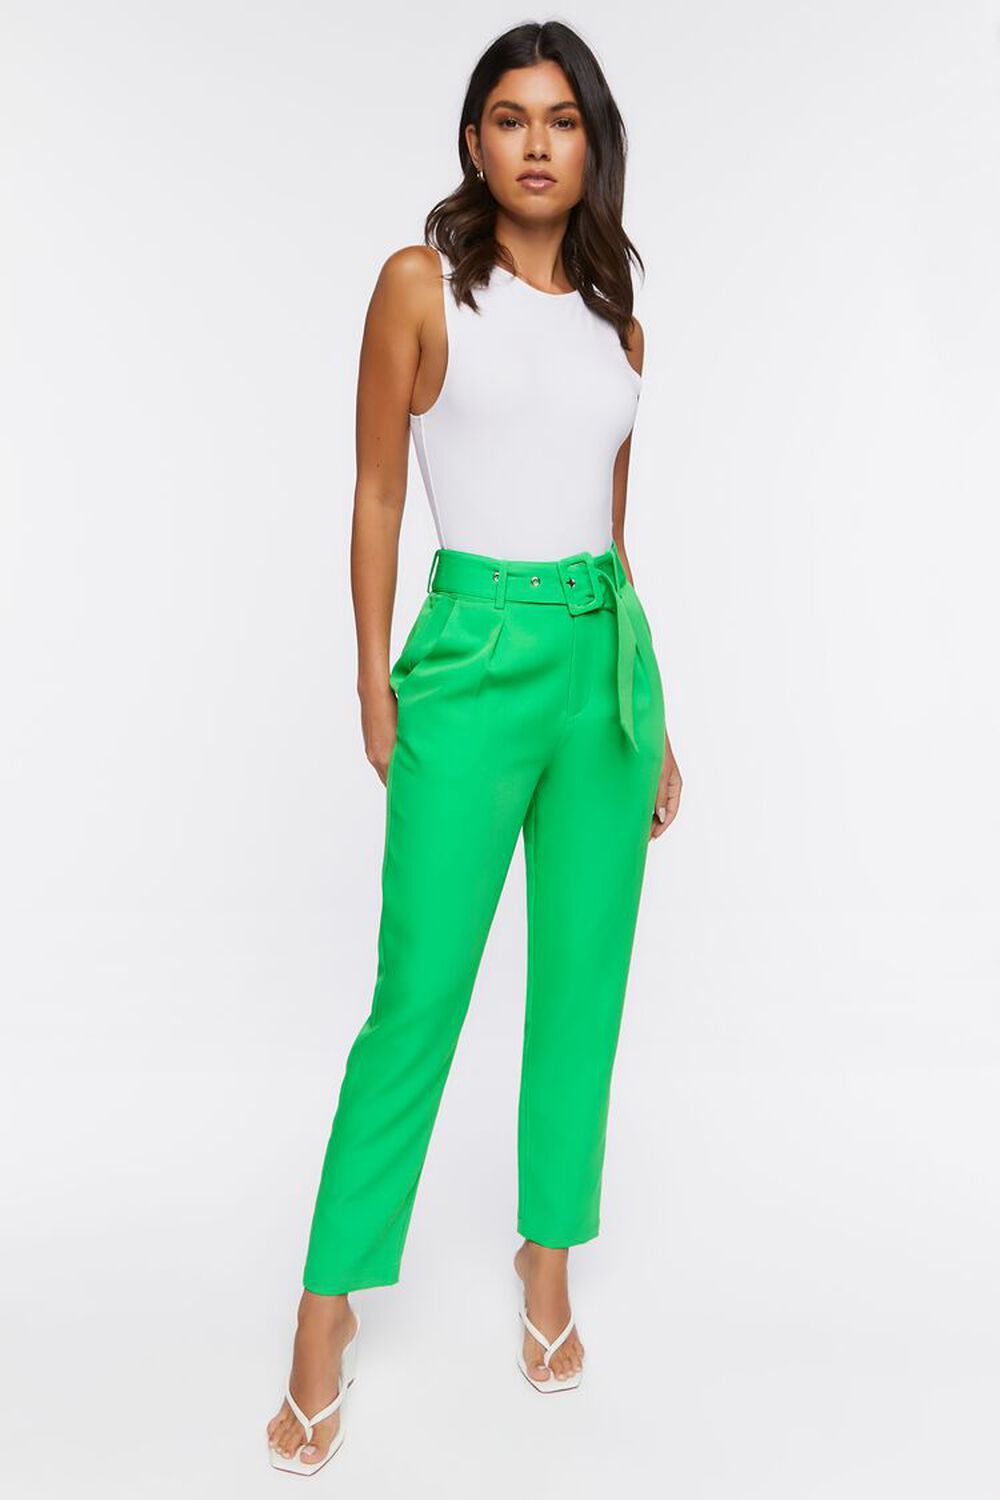 LIGHT GREEN Belted High-Waist Ankle Pants, image 1